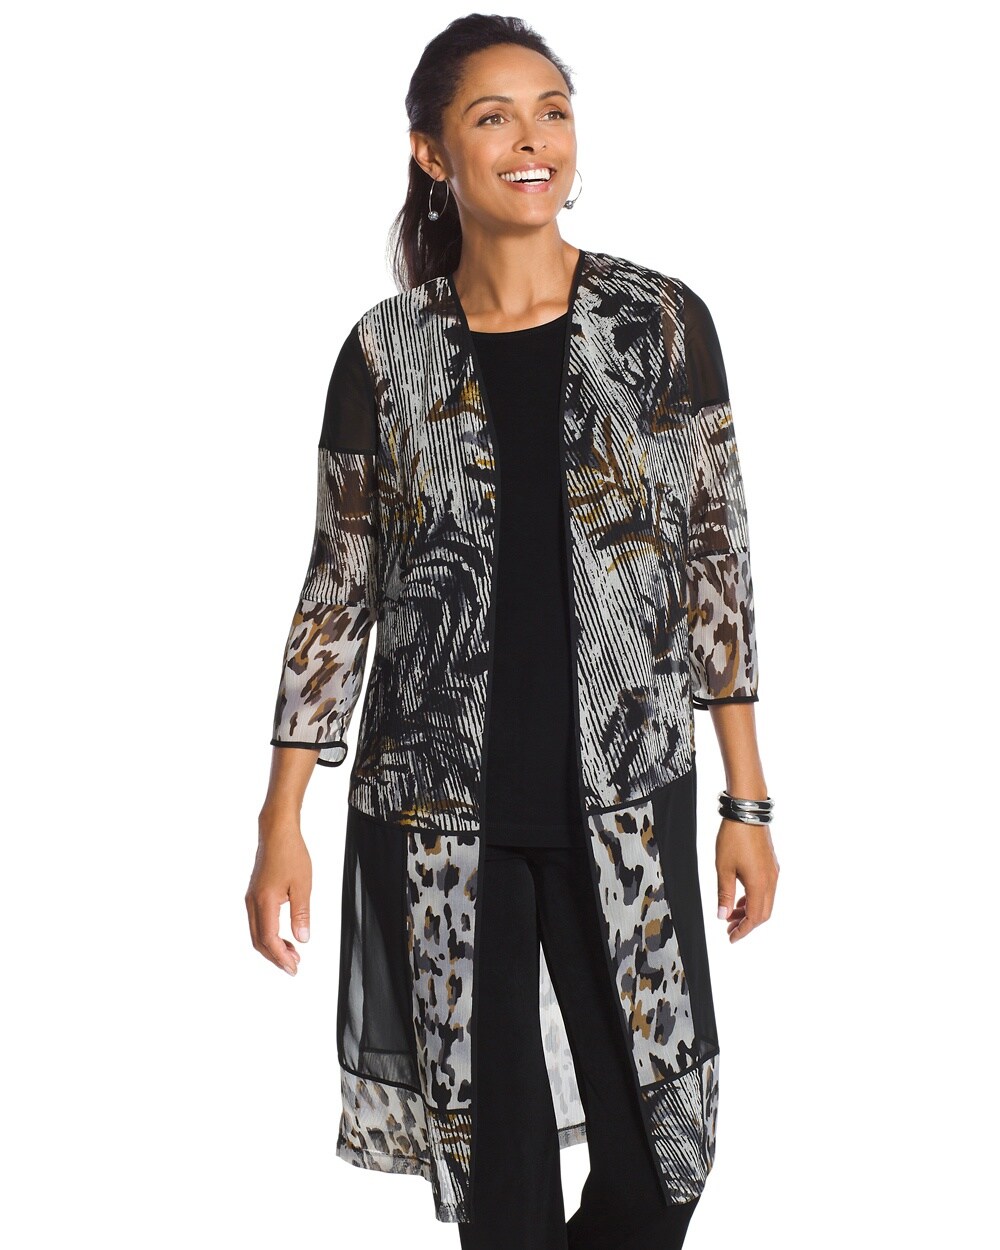 Travelers Collection Patchwork Sheer Duster Jacket